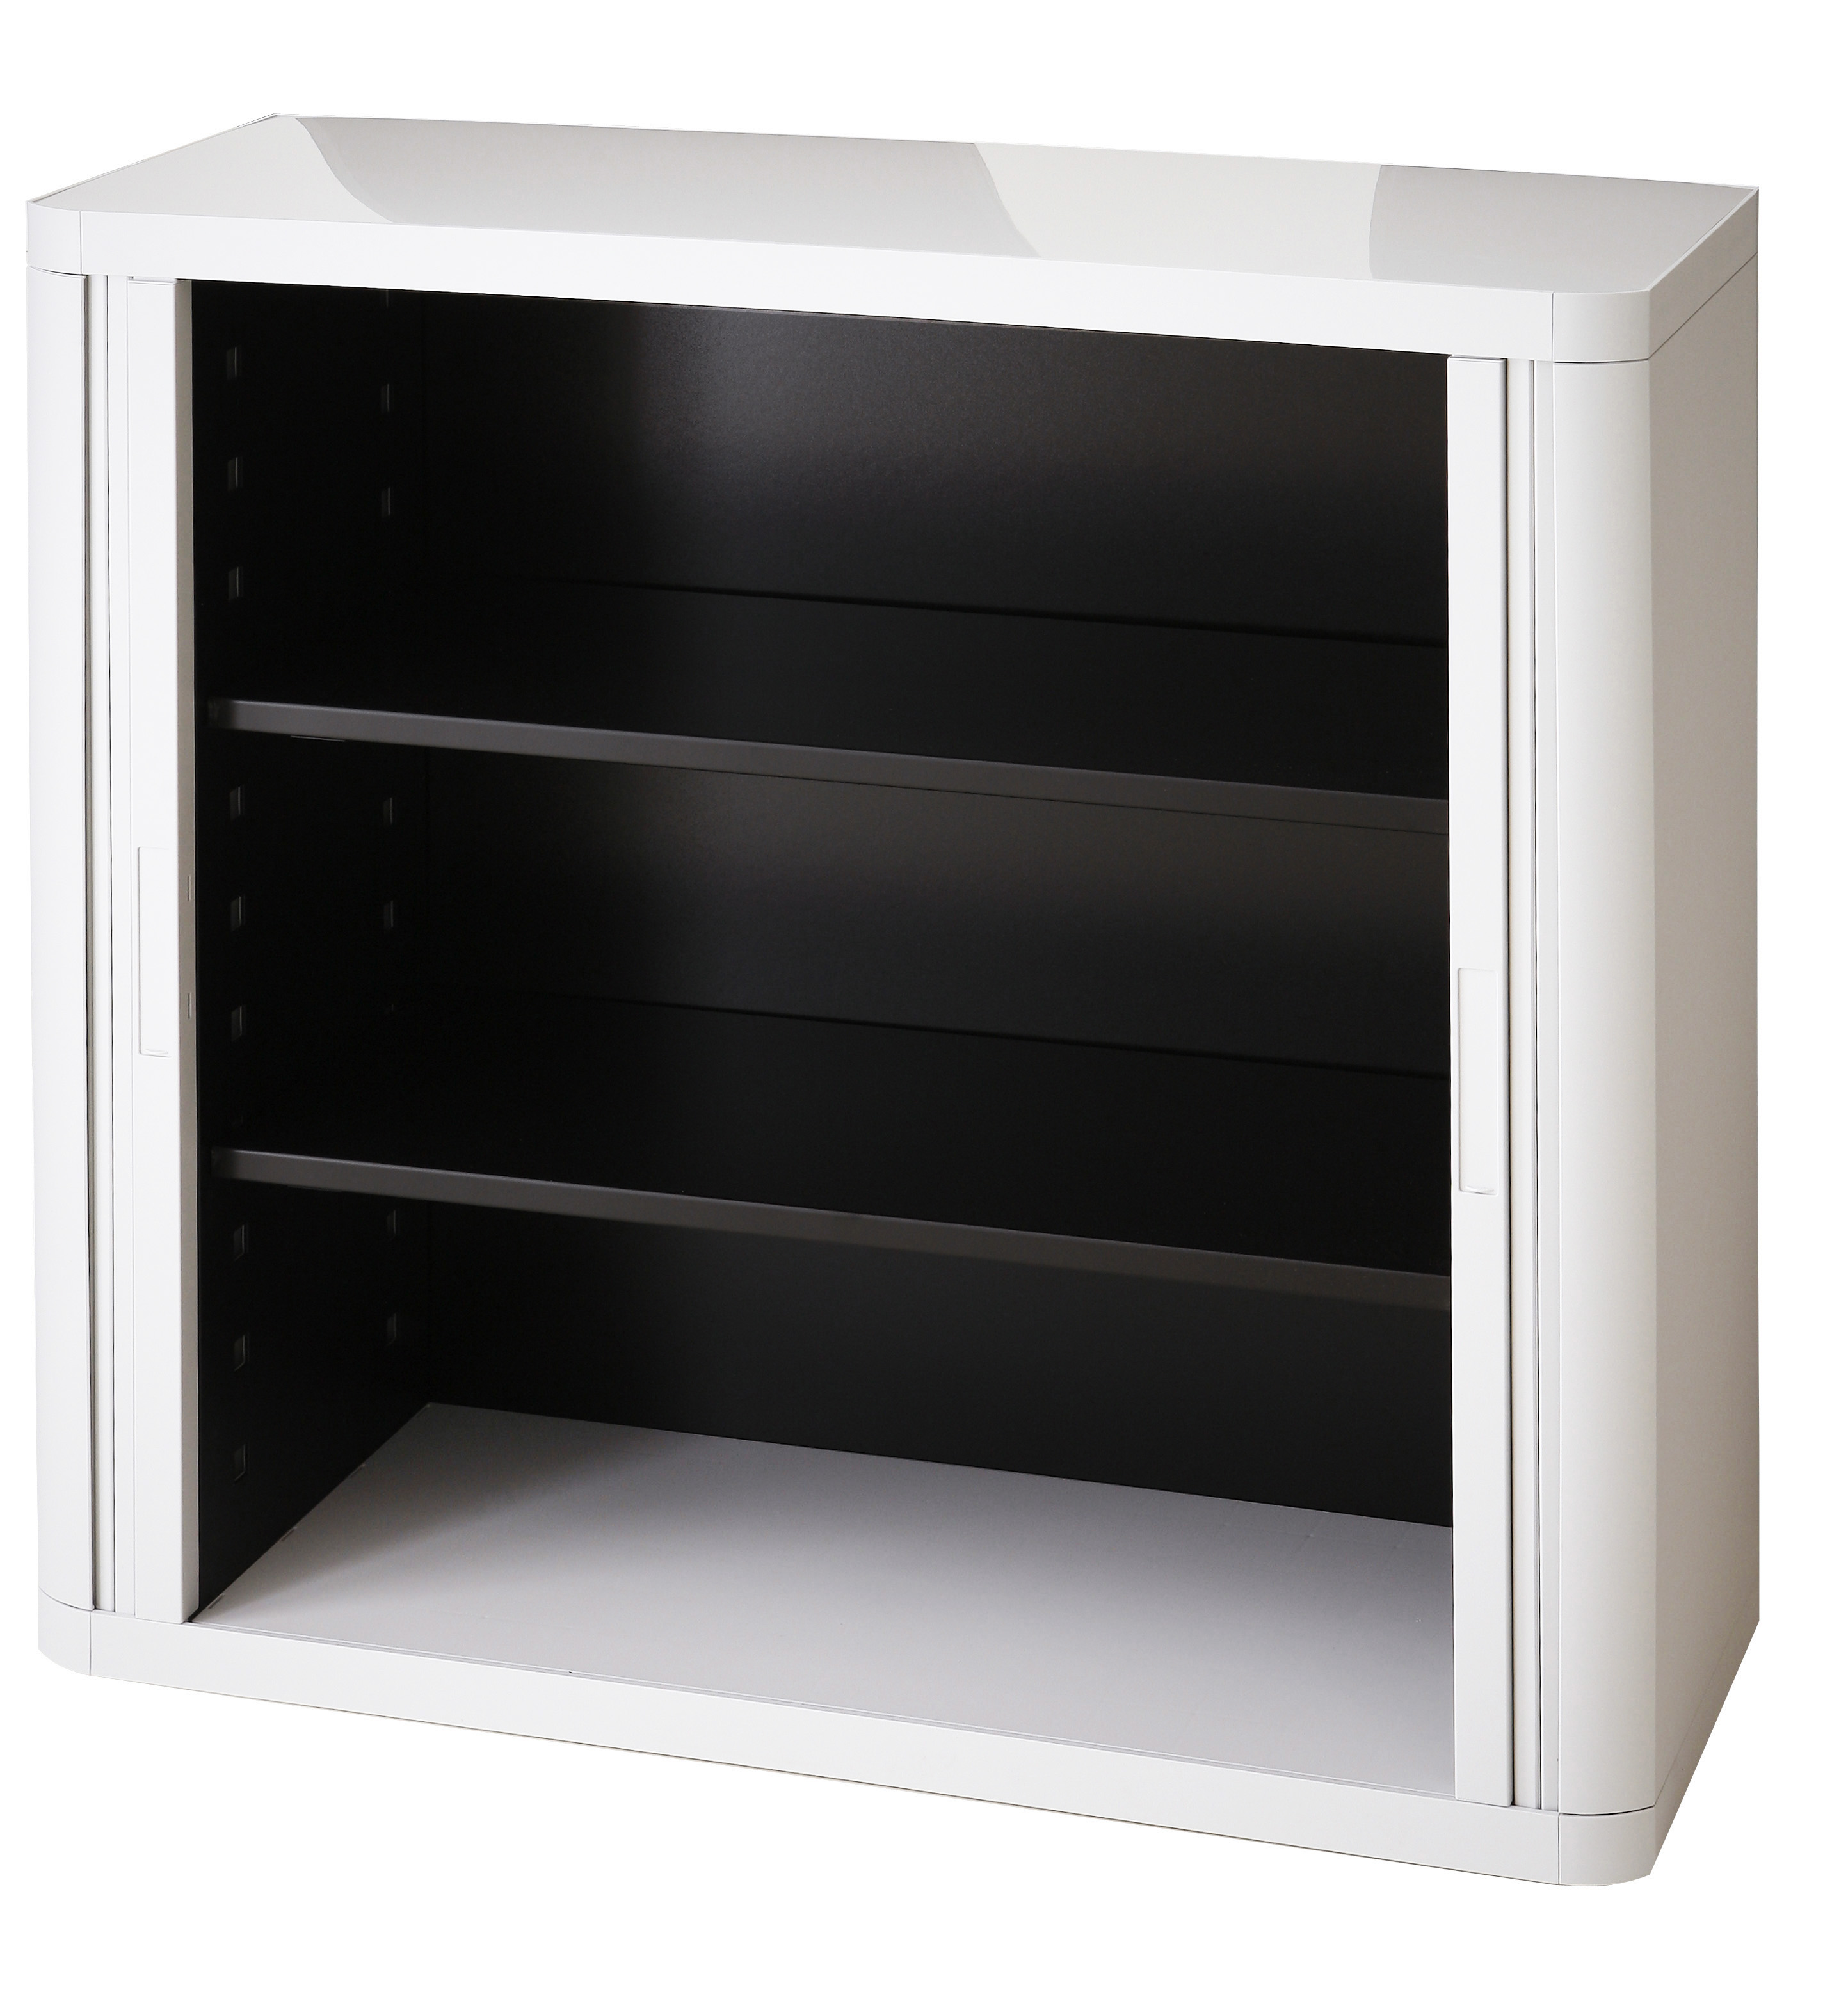 Ee000070 Easyoffice Storage Cabinet, 41'' Tall With Two Shelves, White